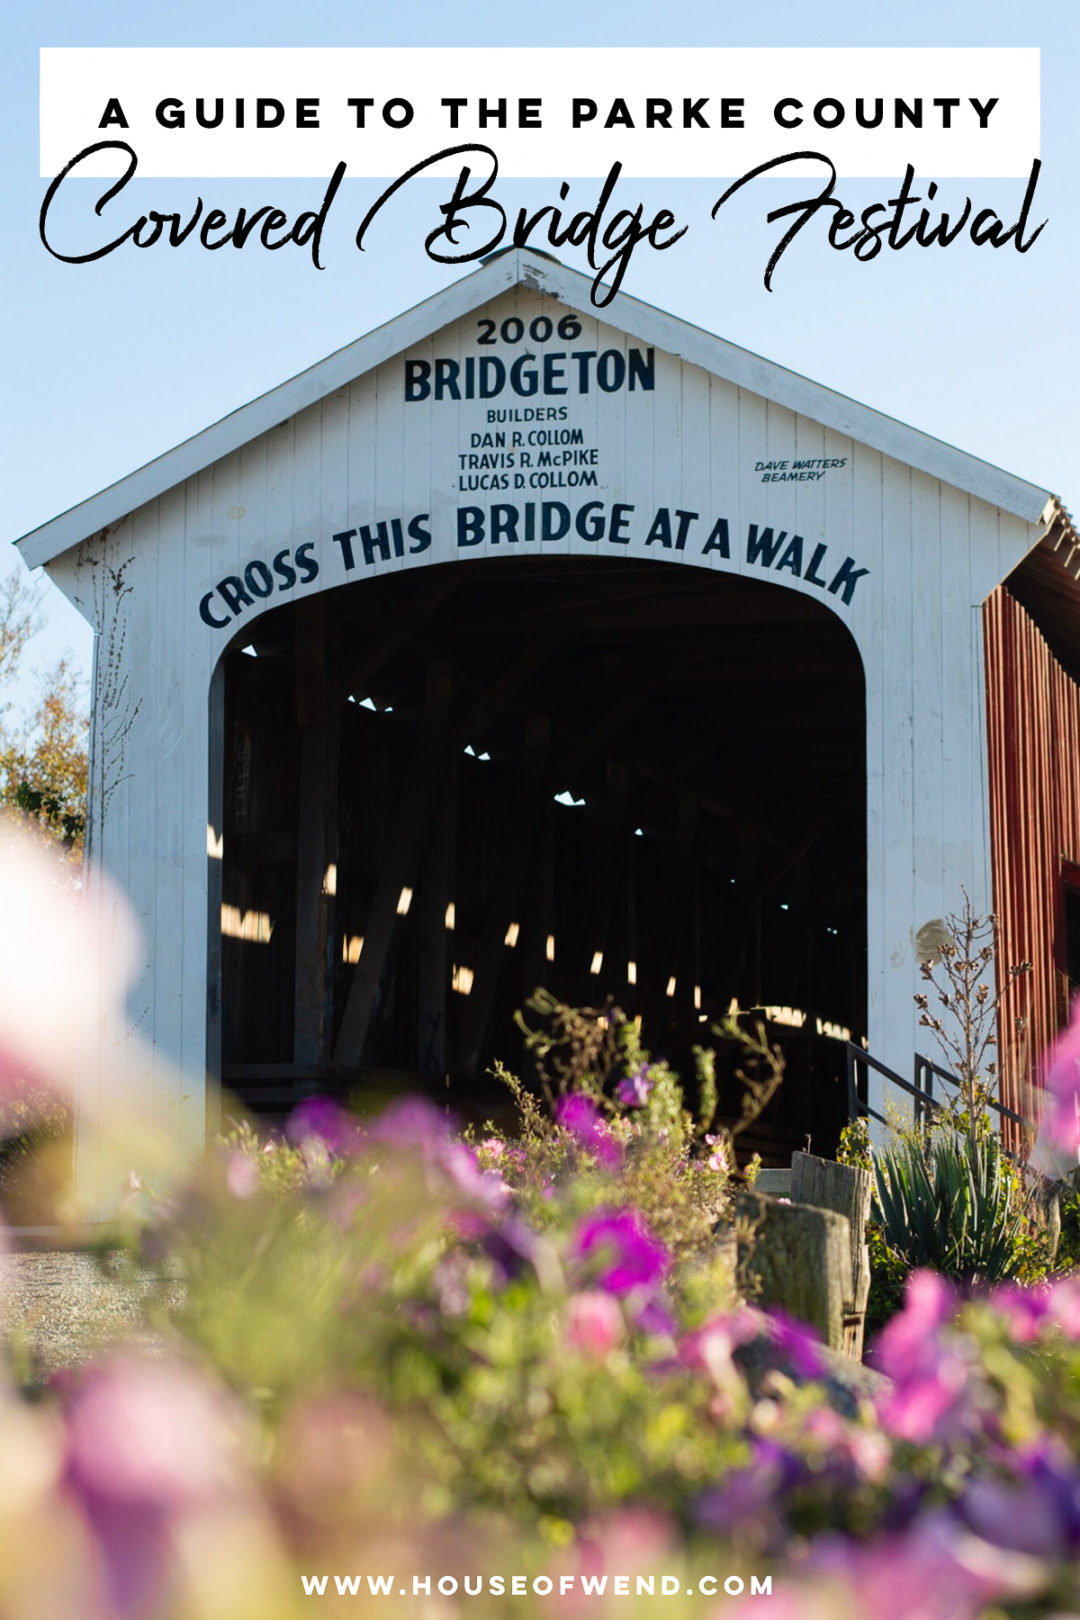 Guide to the Parke County Covered Bridge Festival • HOUSE OF WEND